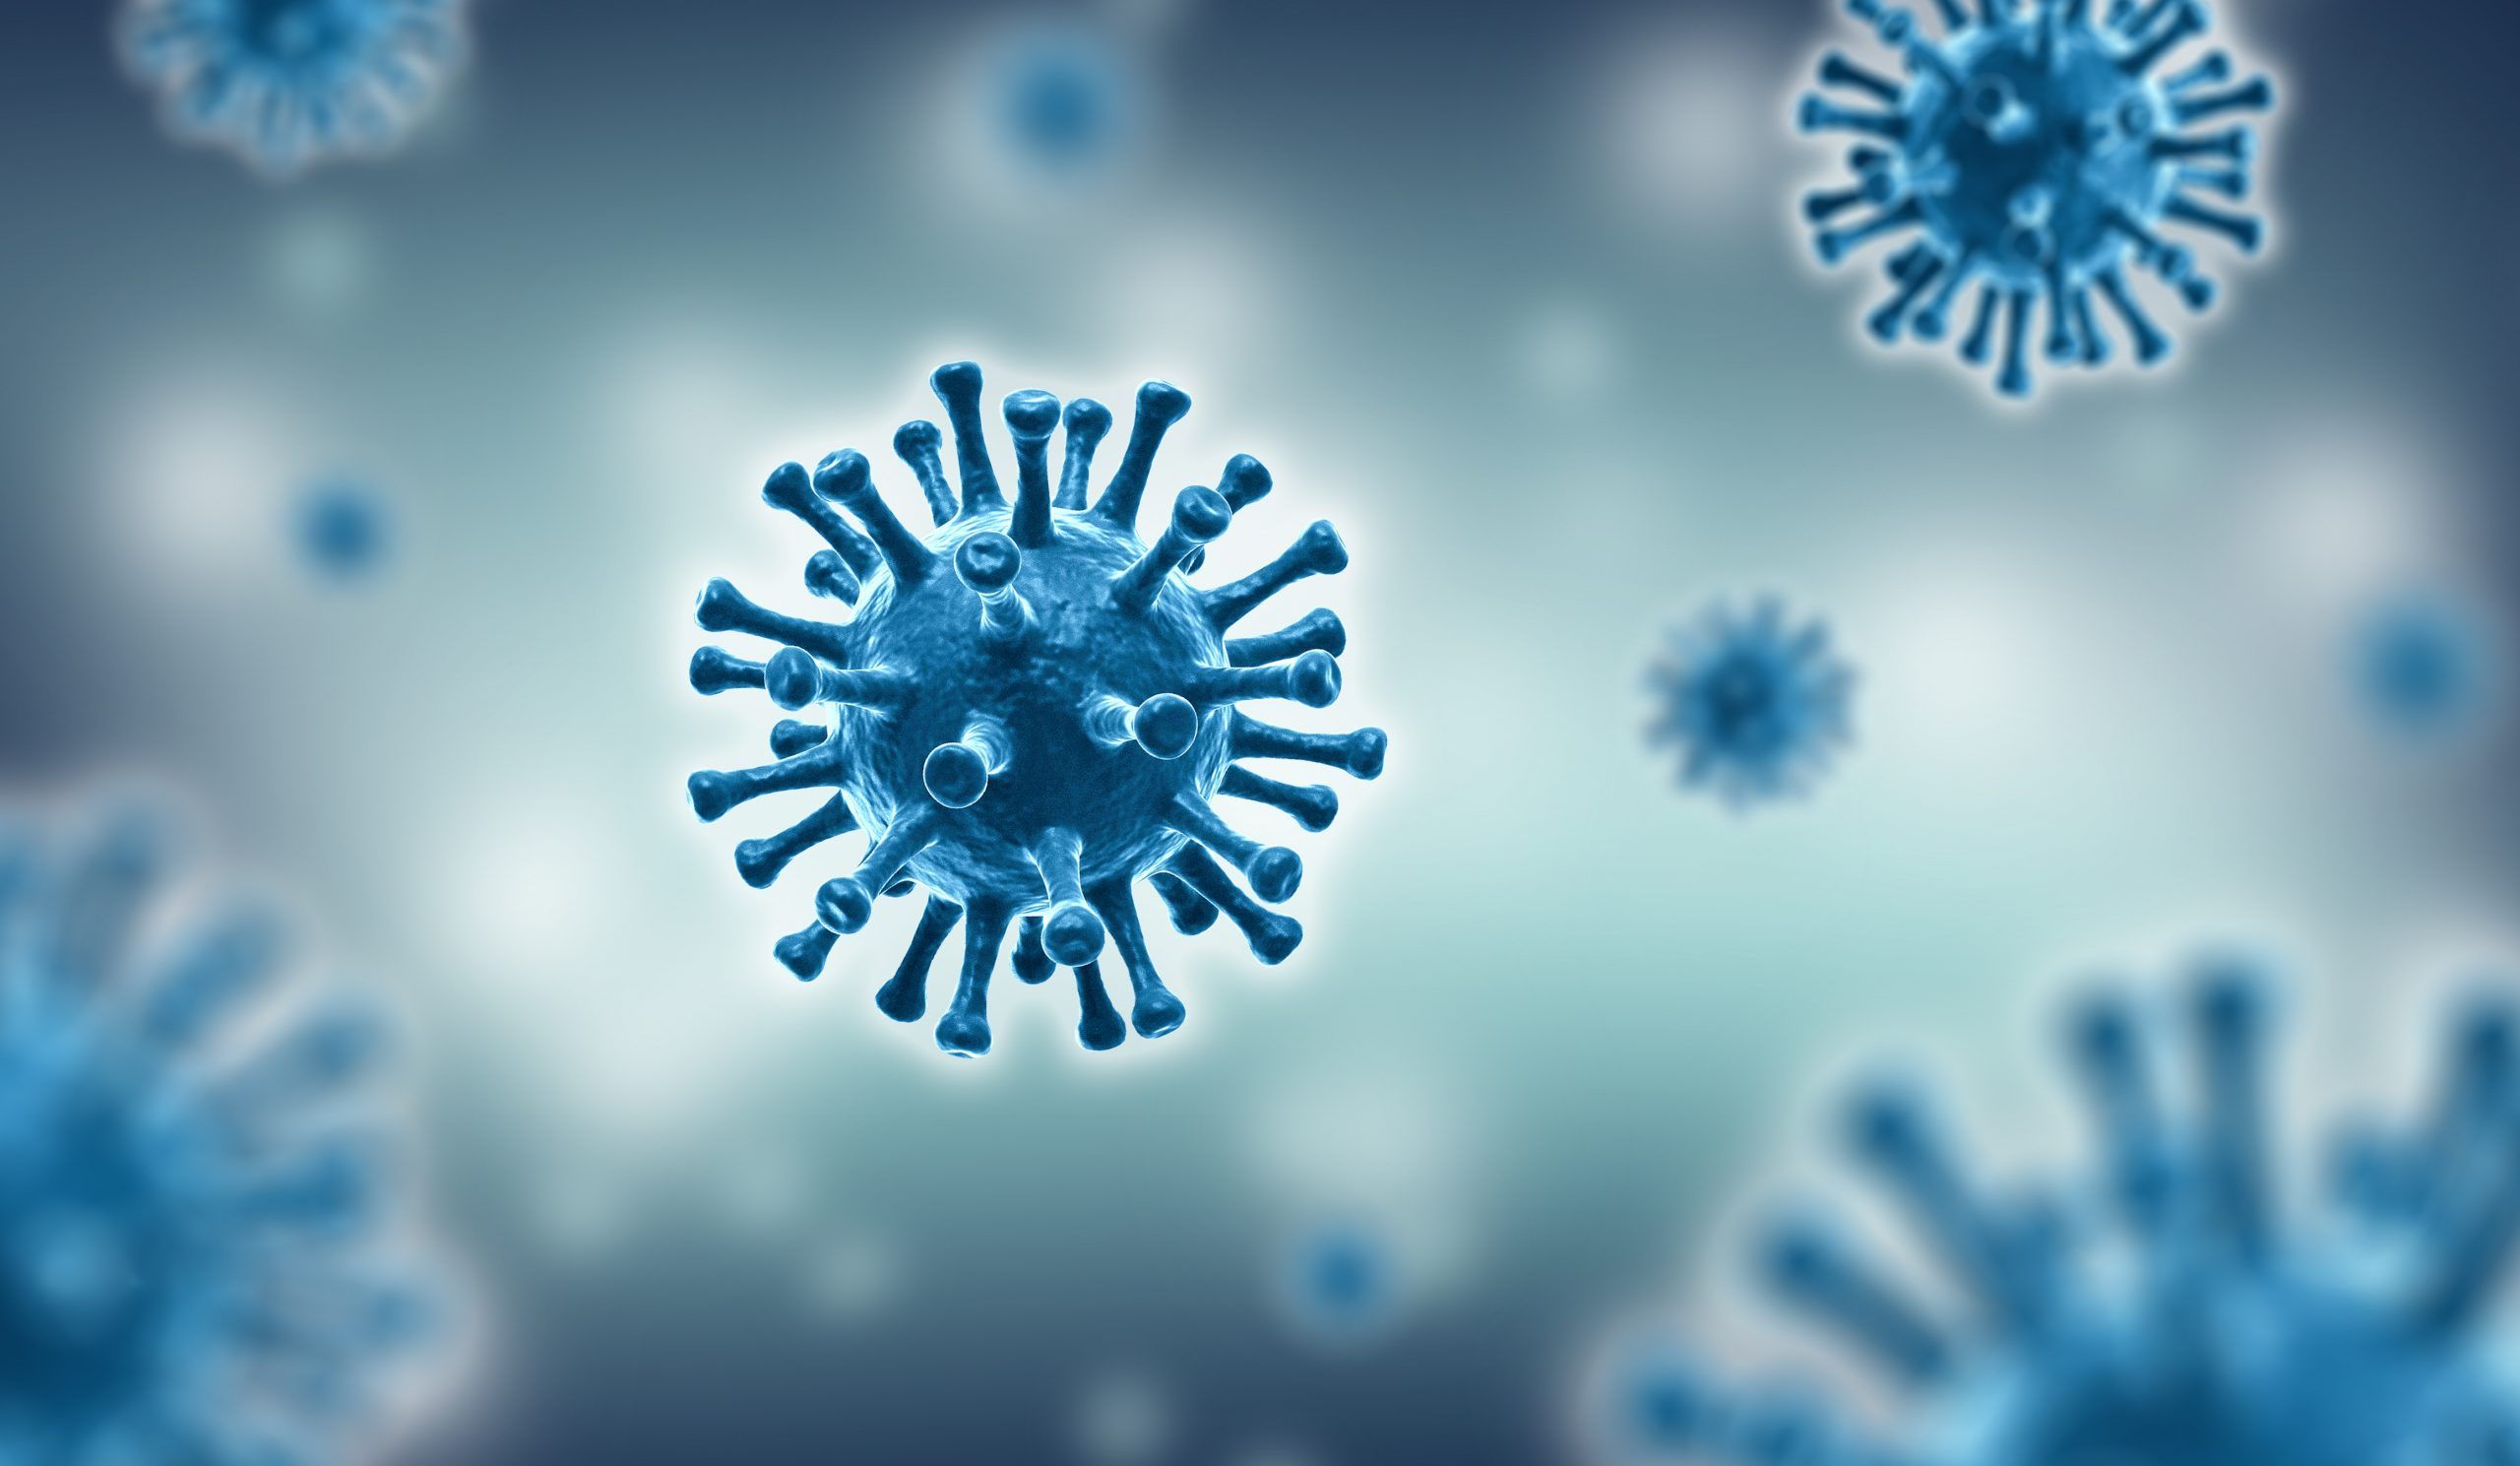 Research suggests Coronavirus immunity could last decades